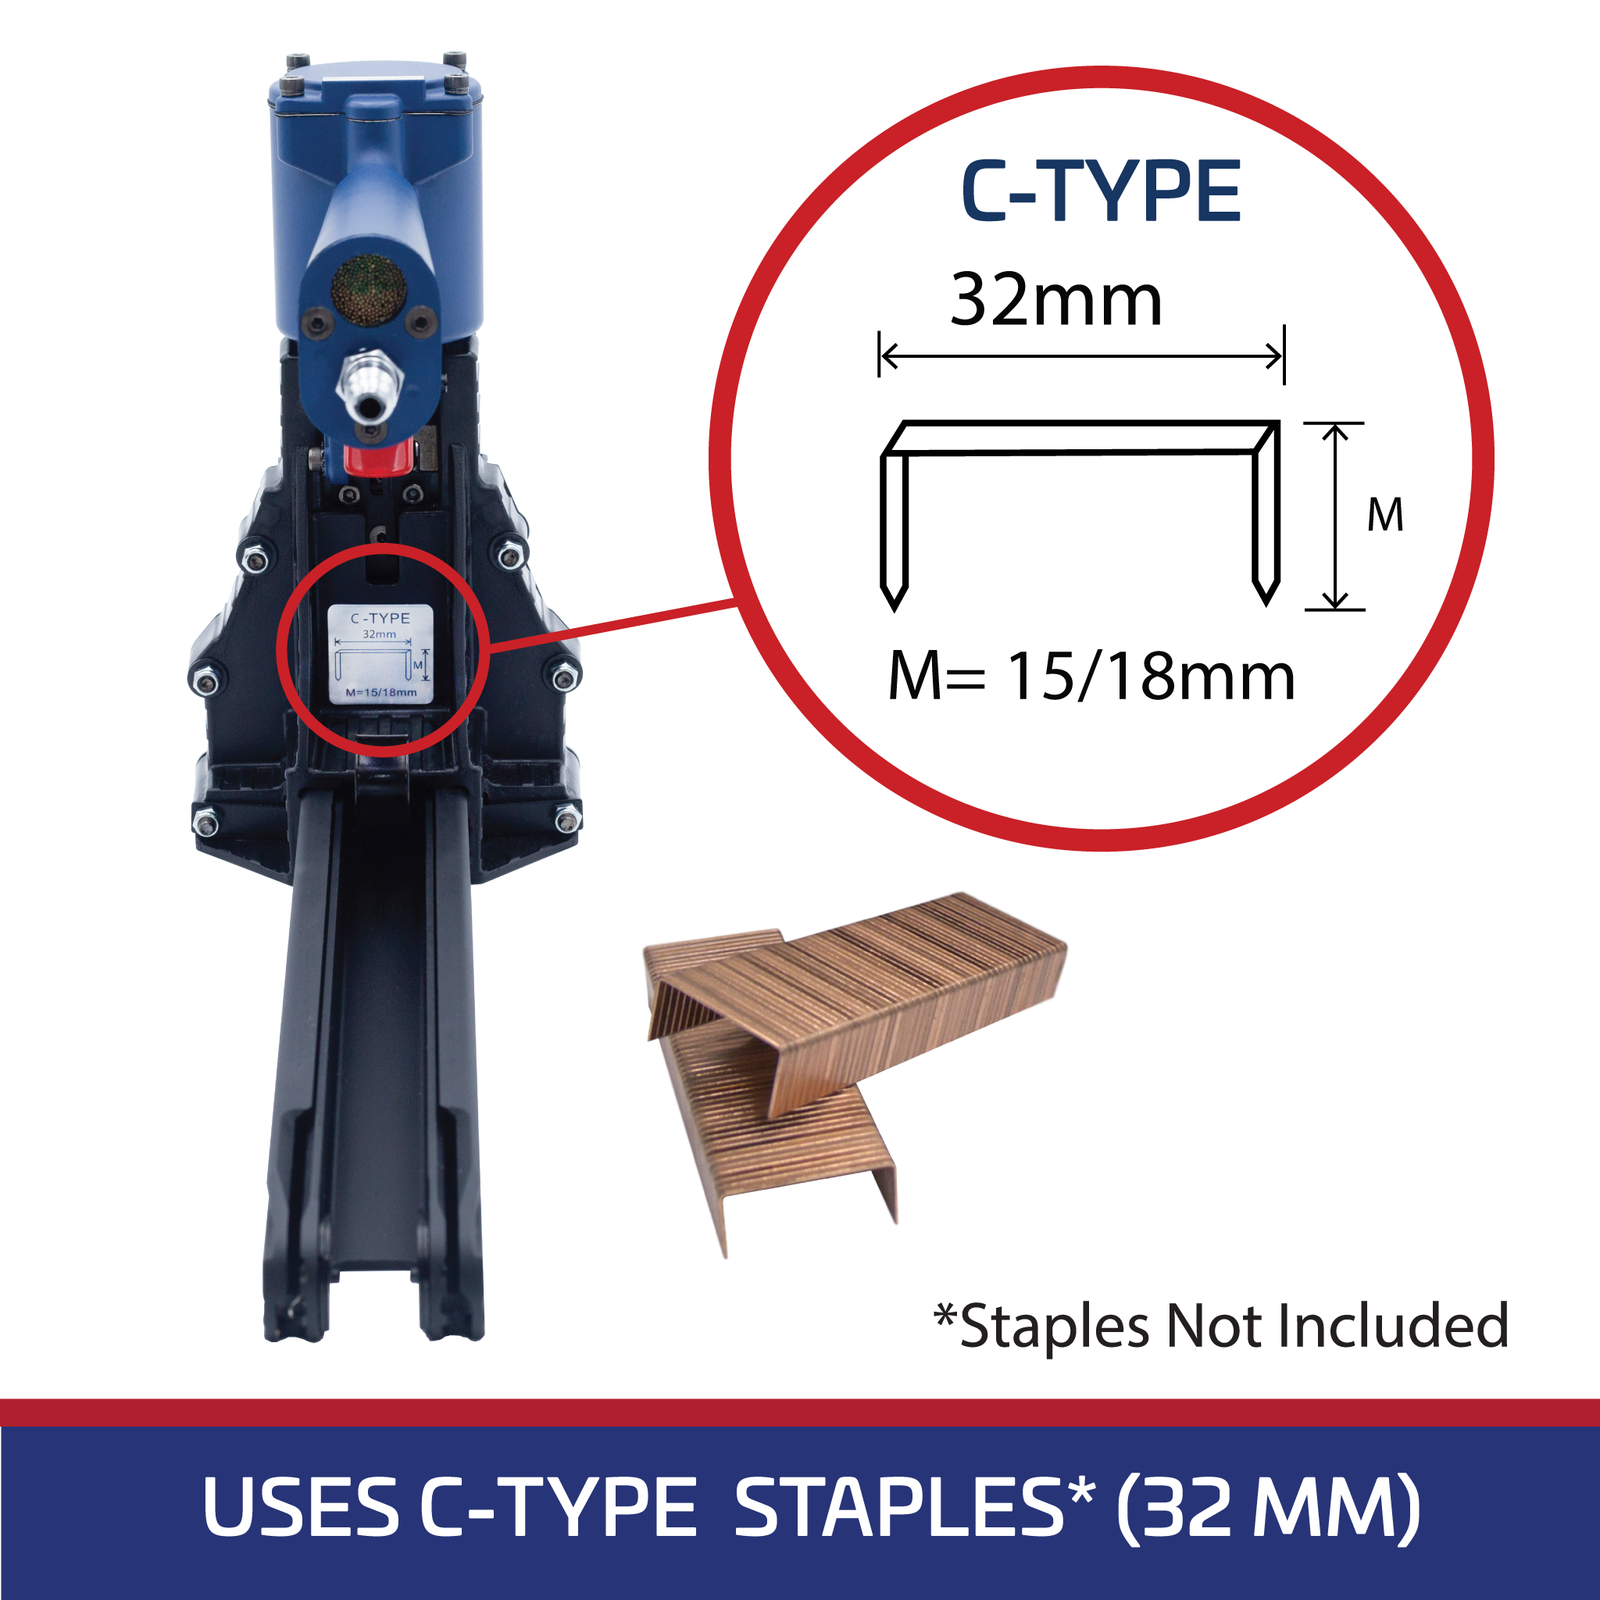 blue and red infographic showing measurements of acceptable staples for a blue and black staple gun which is 32mm